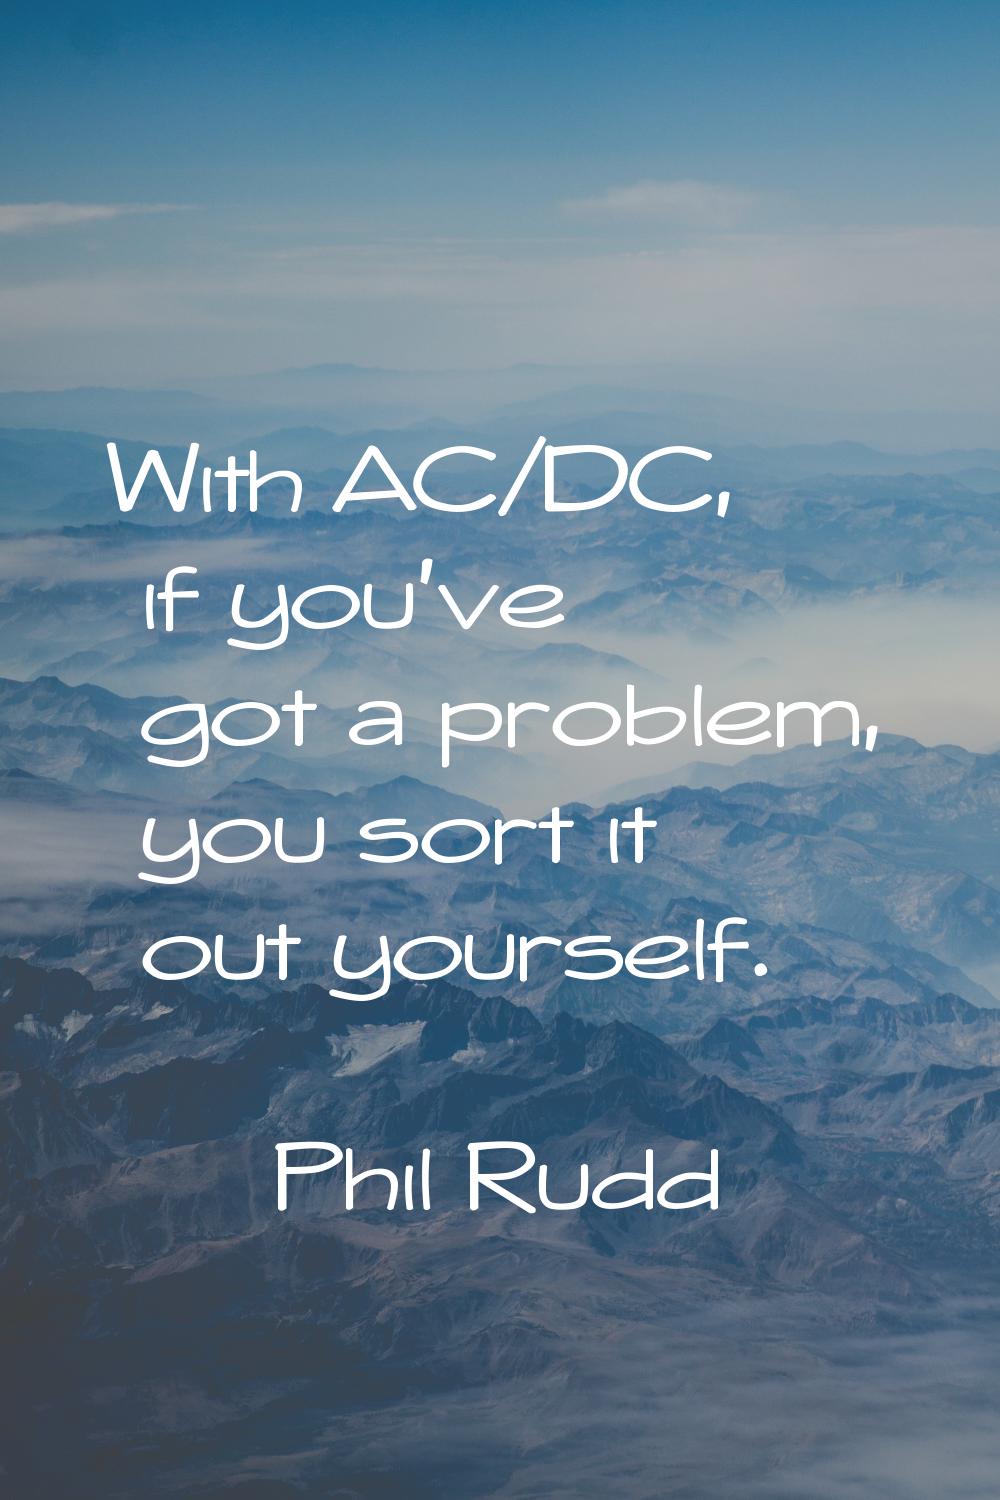 With AC/DC, if you've got a problem, you sort it out yourself.